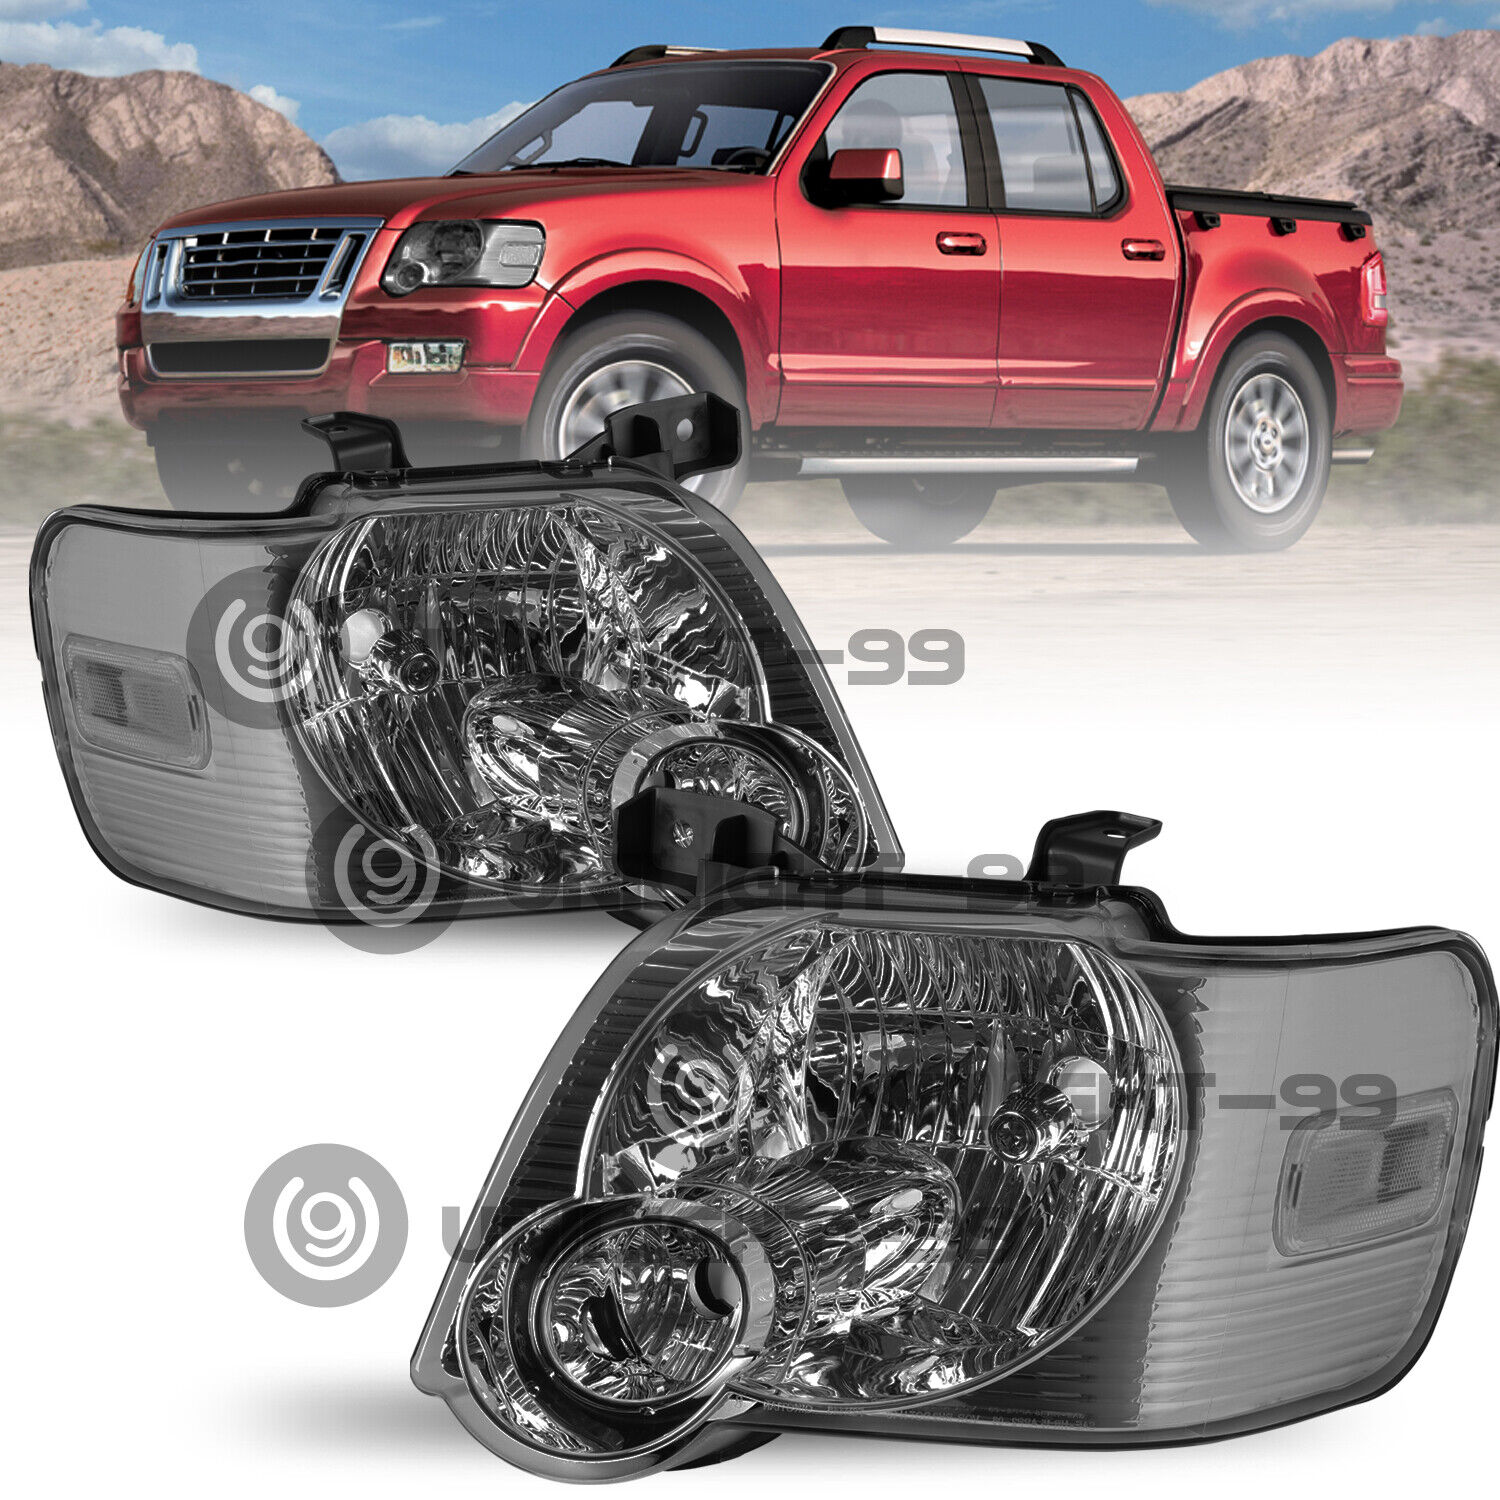 For 2006-2010 Ford Explorer SMOKE Headlights Lamp Assembly Pair Left+Right